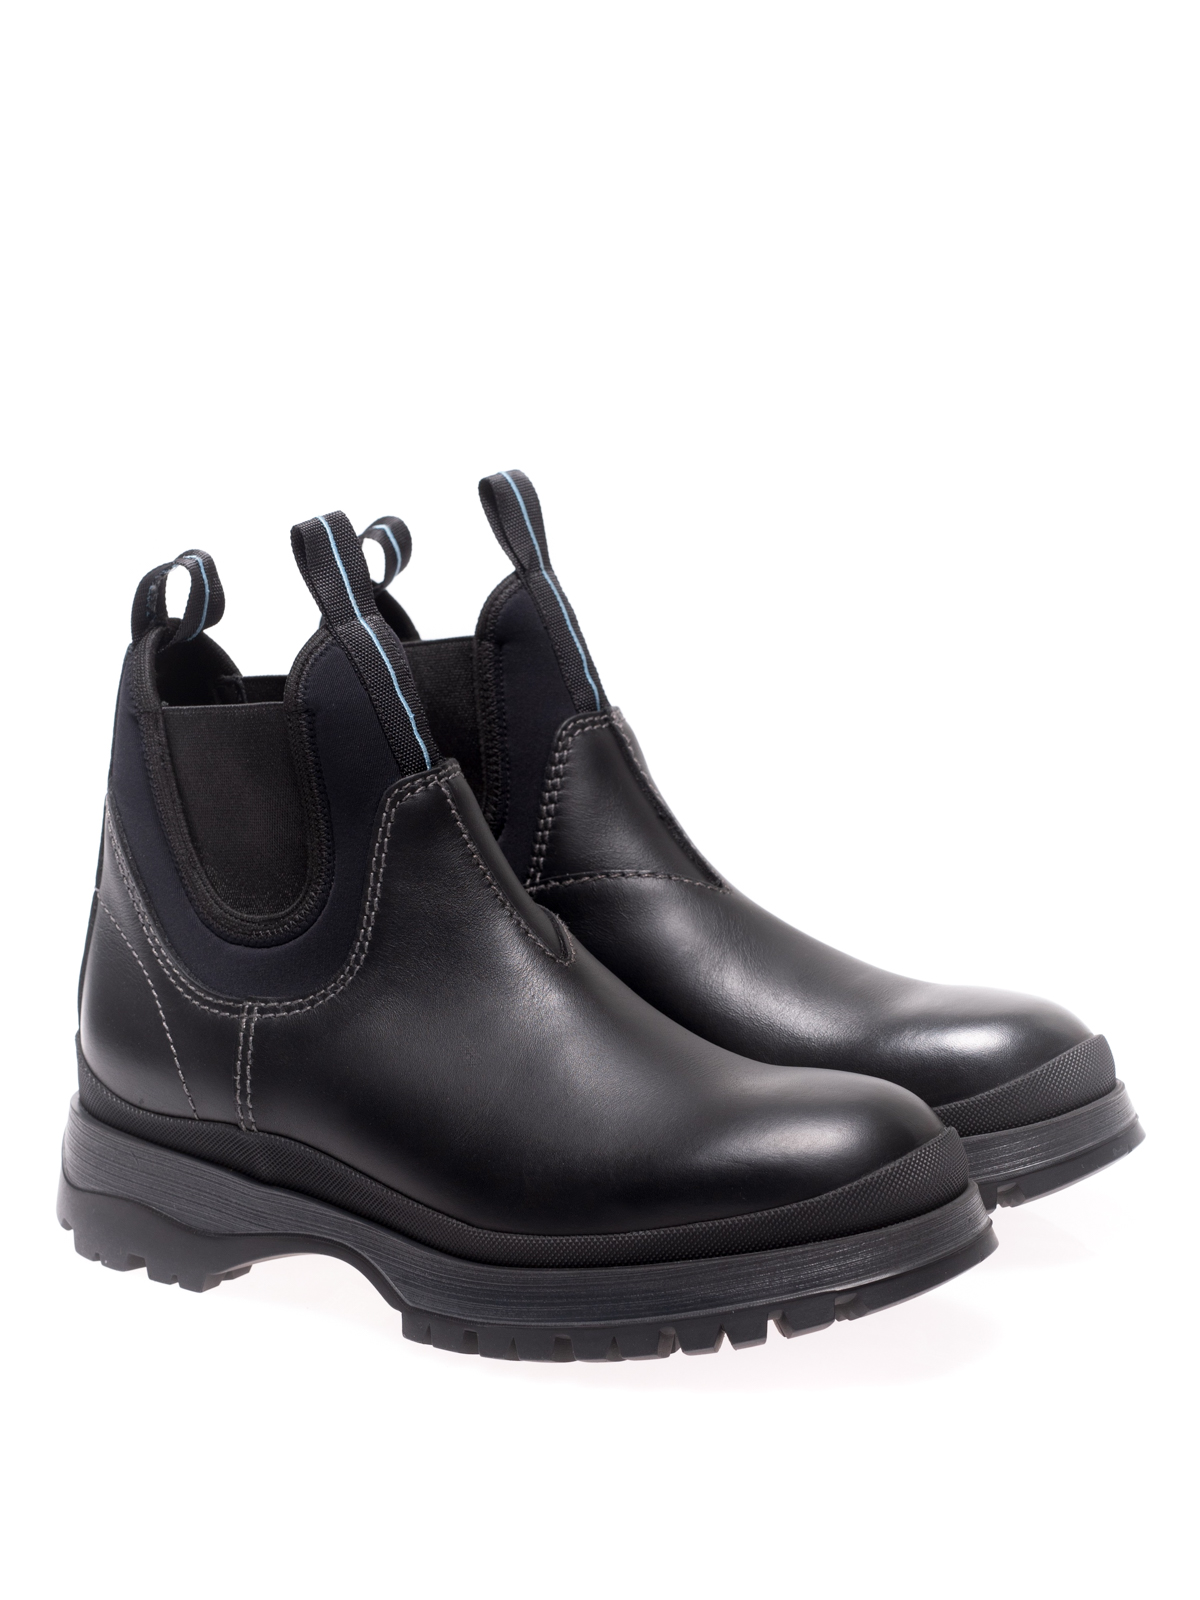 Black leather and neoprene ankle boots 